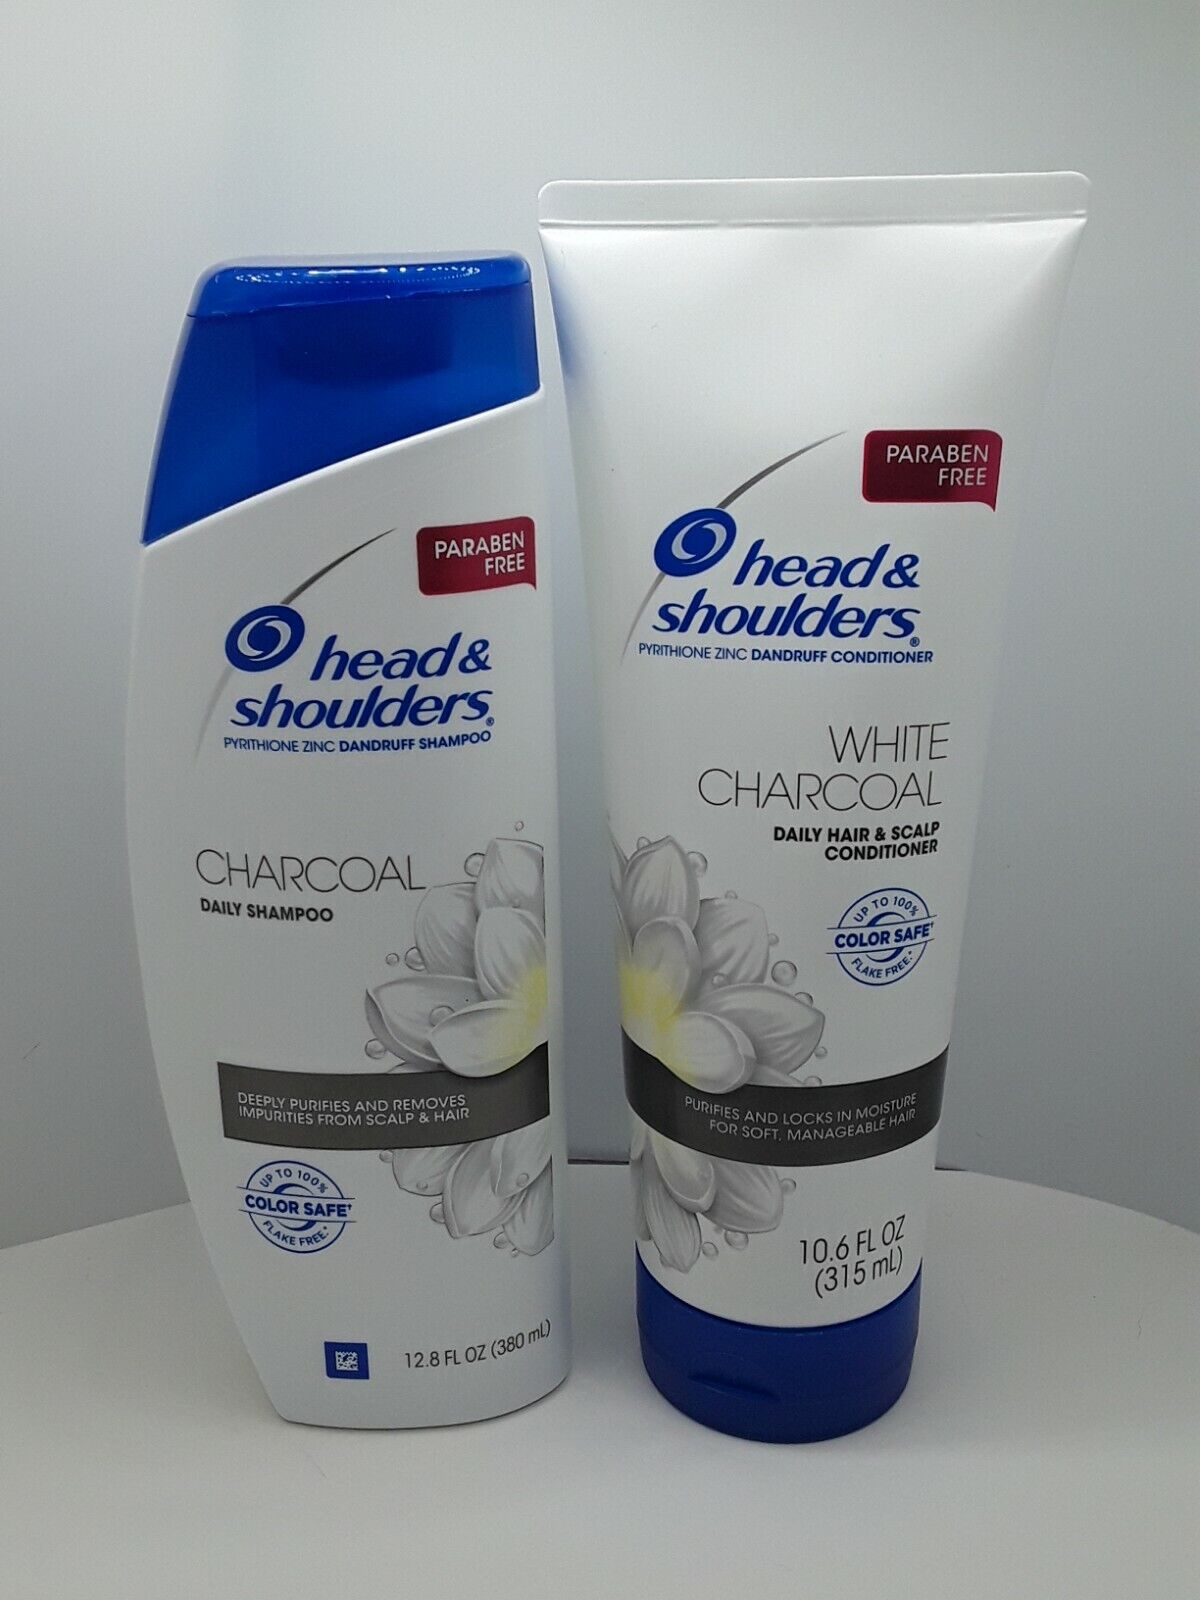 Head & Shoulders  Charcoal SHAMPOO & White Charcoal CONDITIONER SET Paraben Free